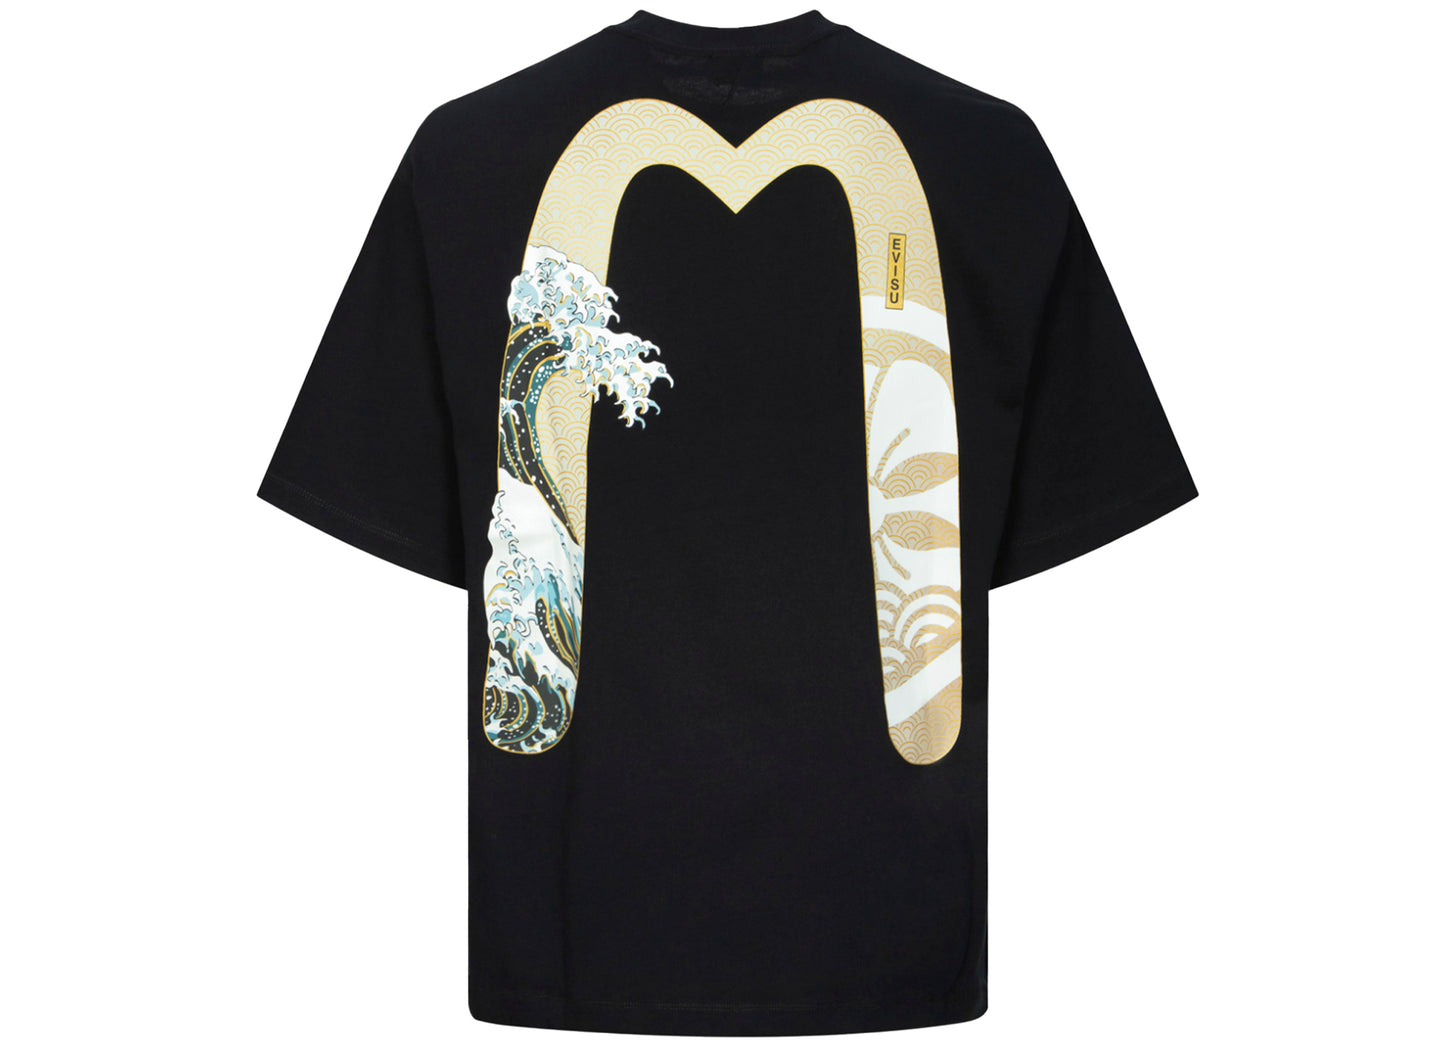 Evisu Kamon and the Great Wave Daicock Print Relax Fit T-Shirt xld